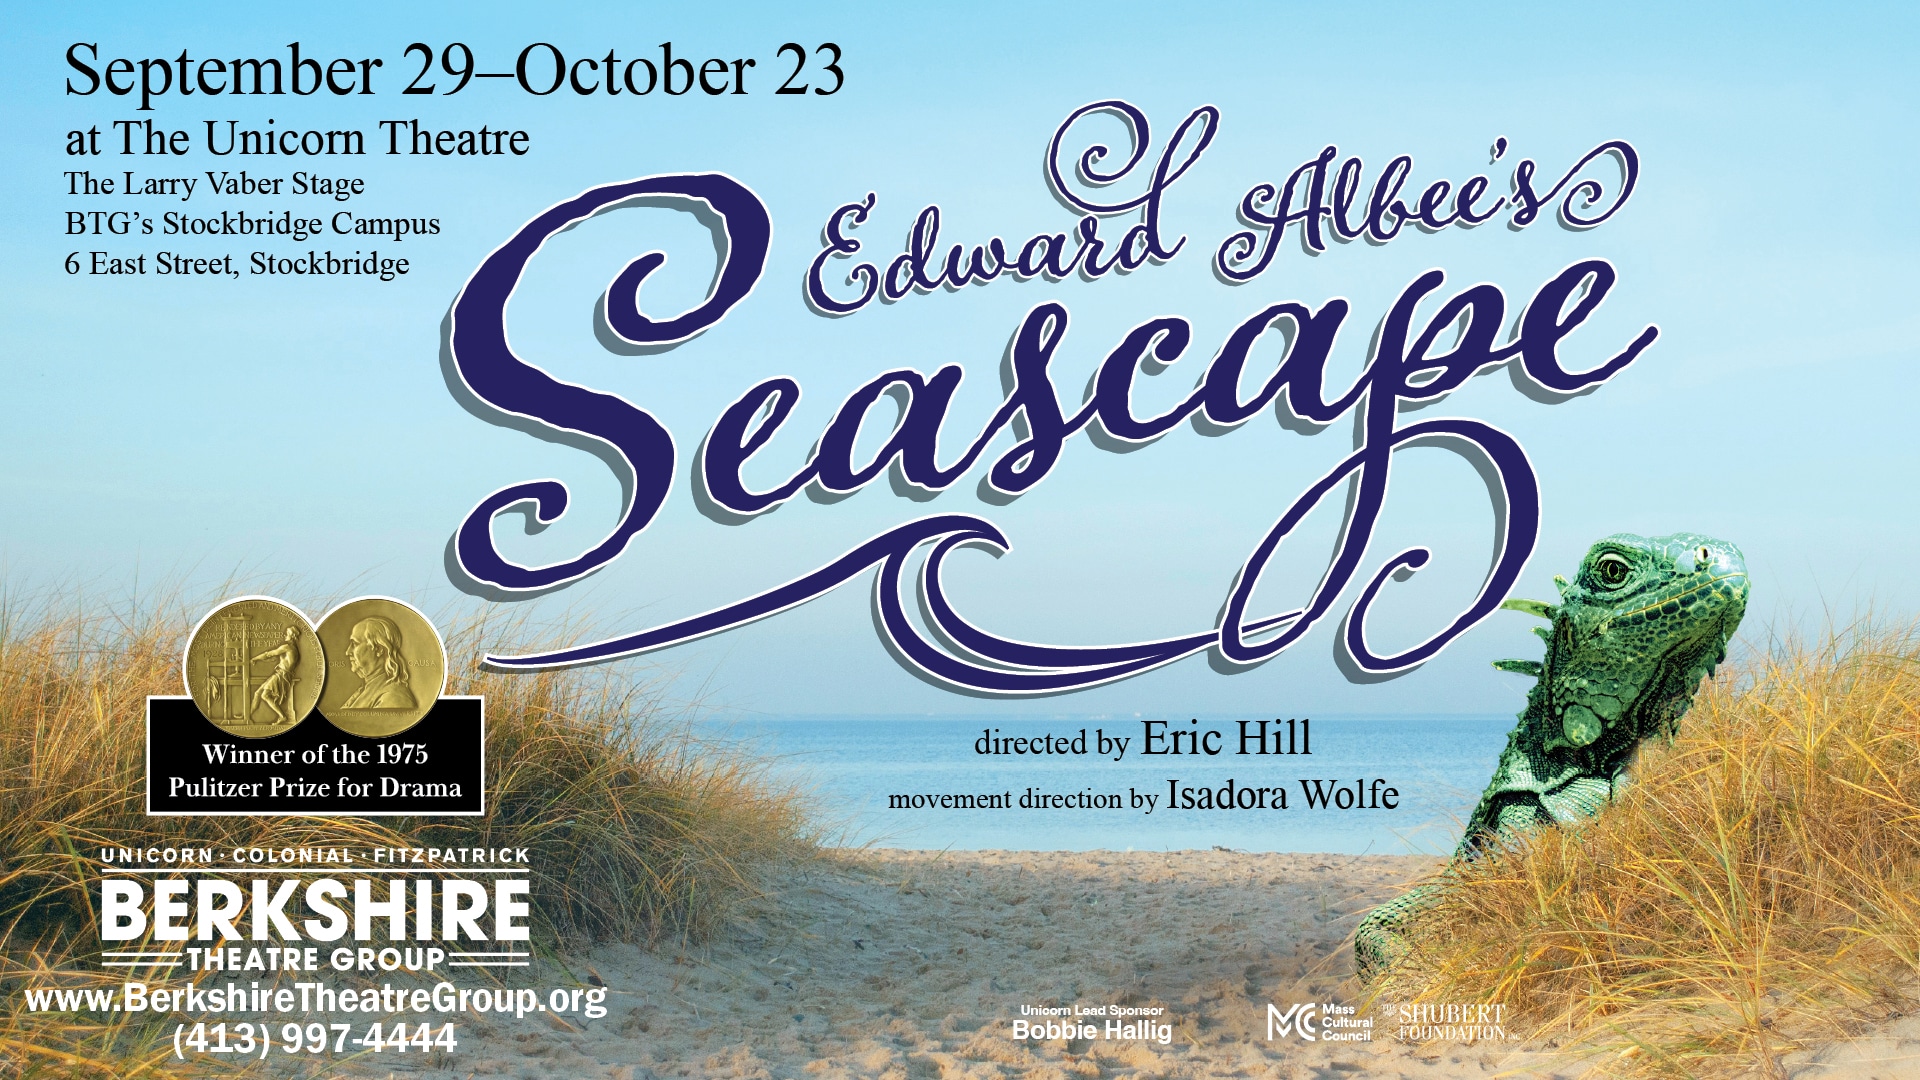 A Director's Note on "Seascape" Berkshire Theatre Group